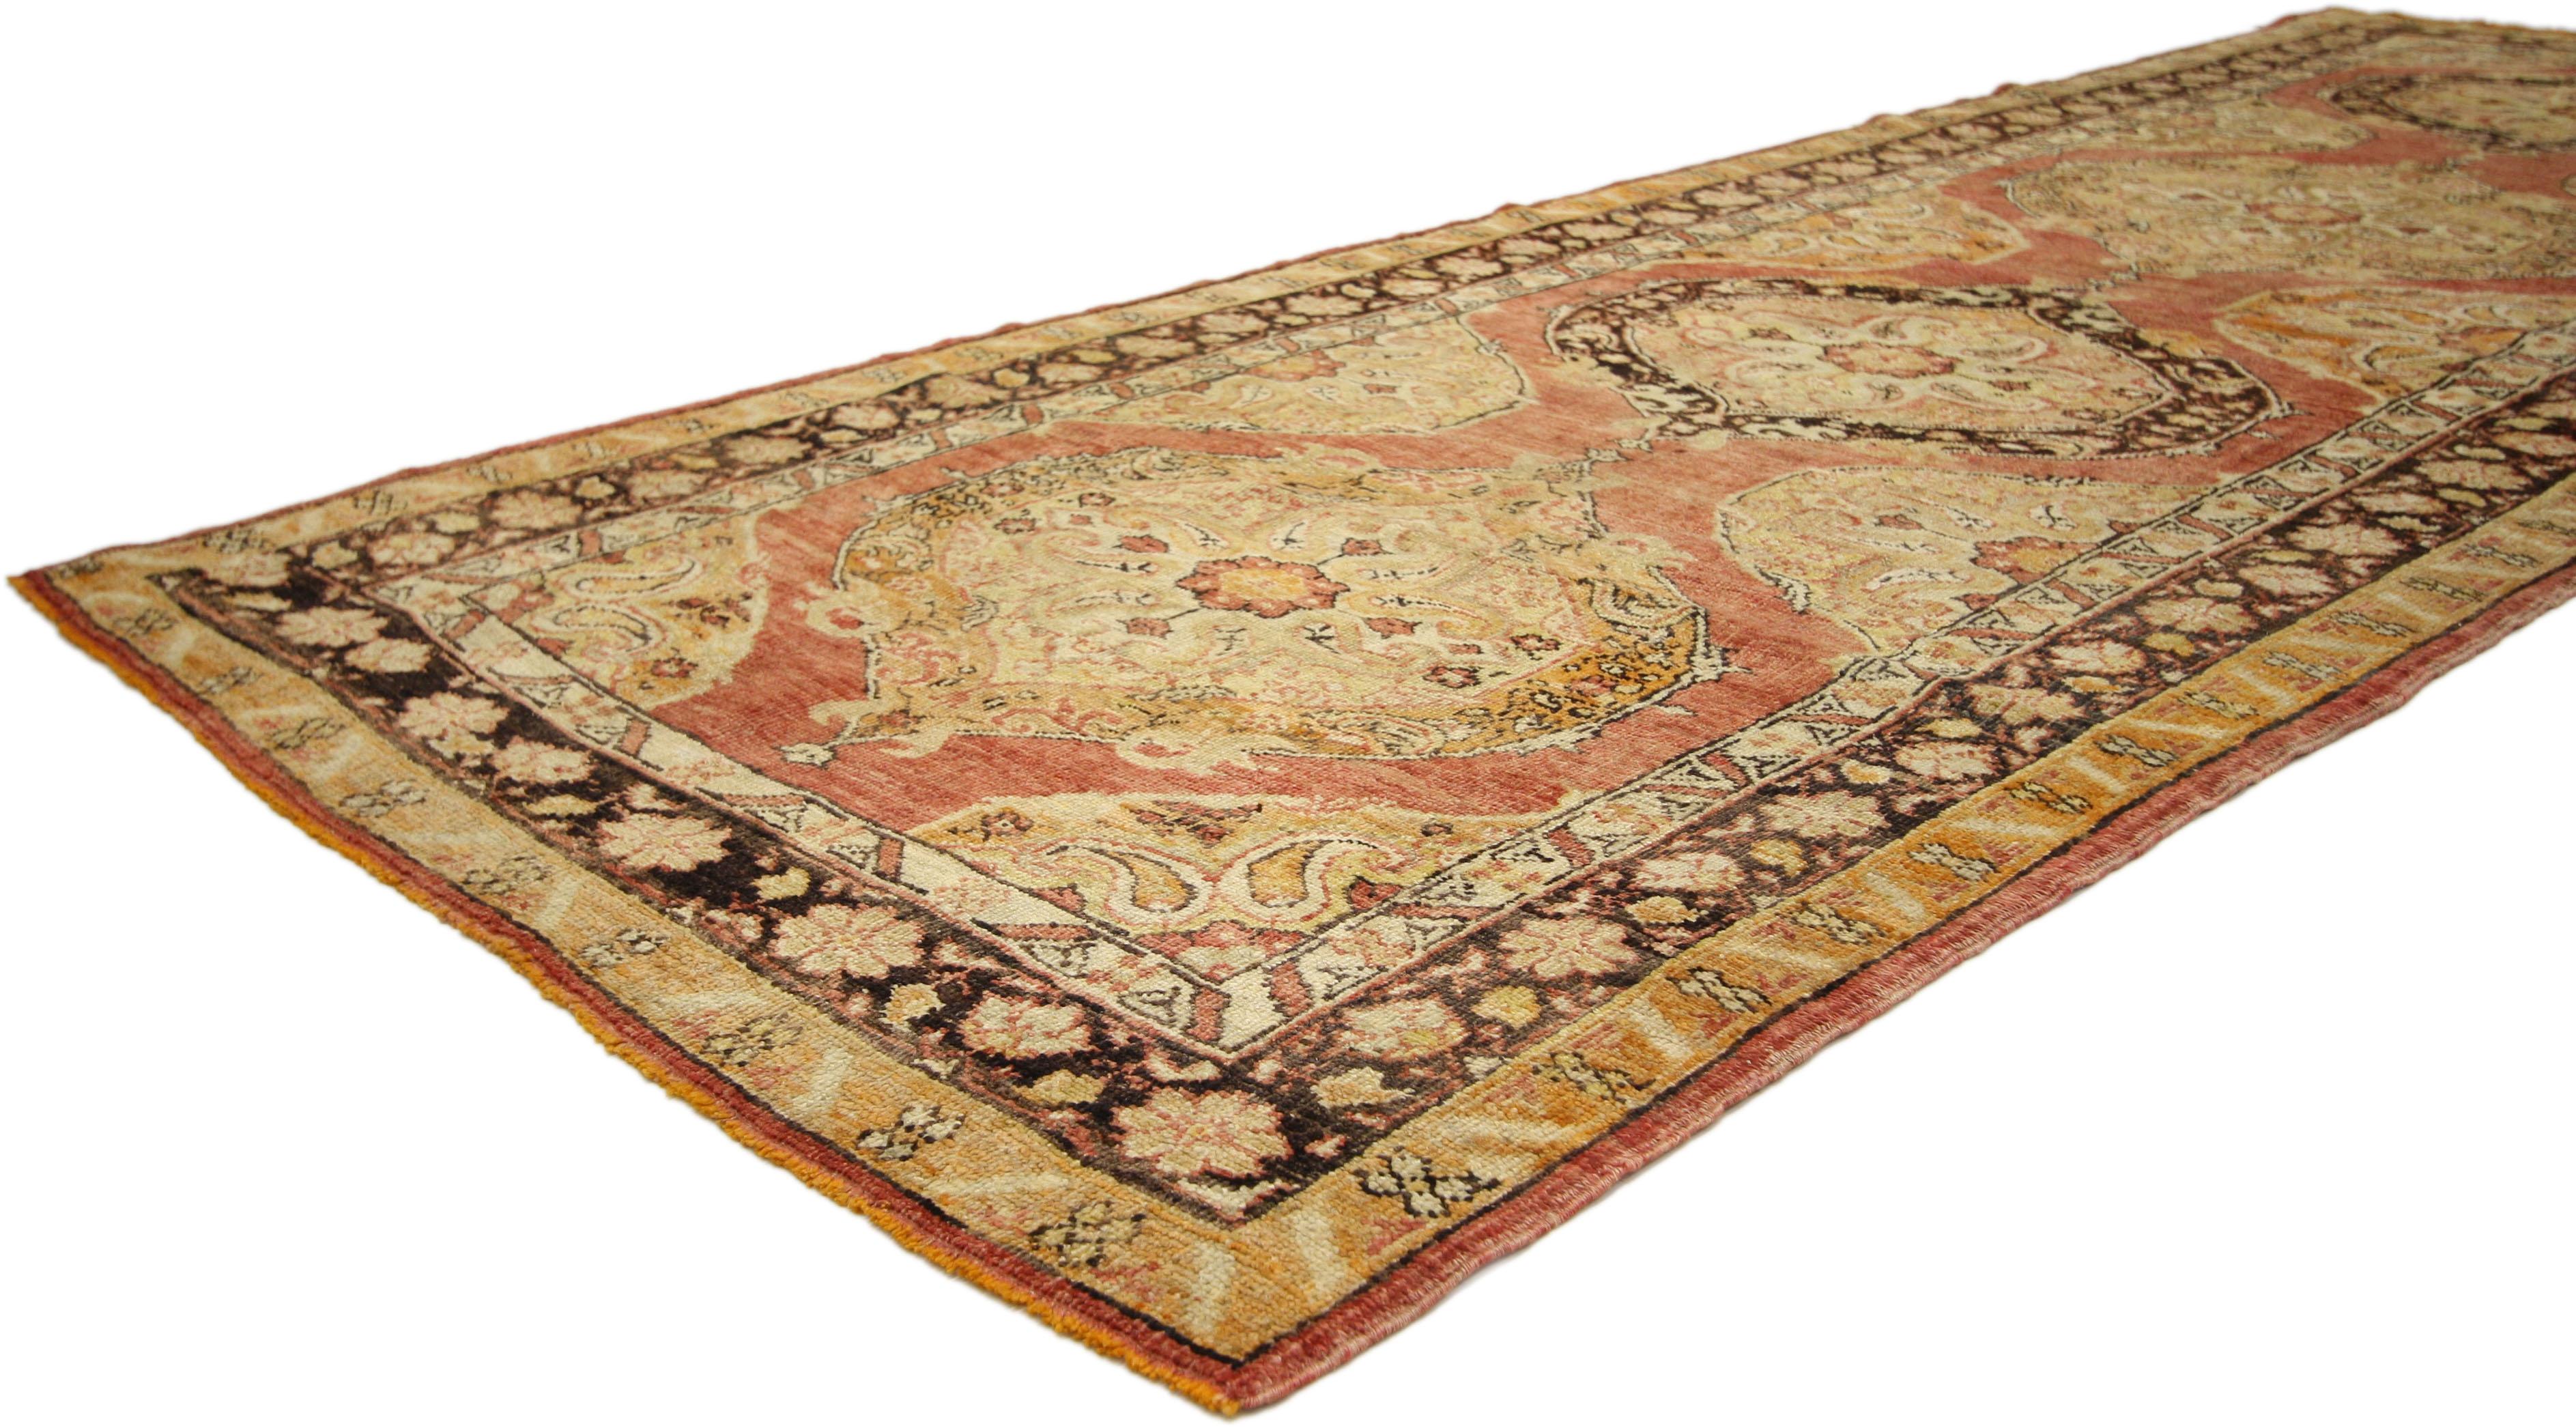 51055-51056 Pair of Vintage Turkish Oushak Runners with Spanish Colonial Tuscan Style. Emanating grace and timeless style, this pair of hand-knotted wool vintage Turkish Oushak runners beautifully embody Spanish Colonial style with rustic Tuscan